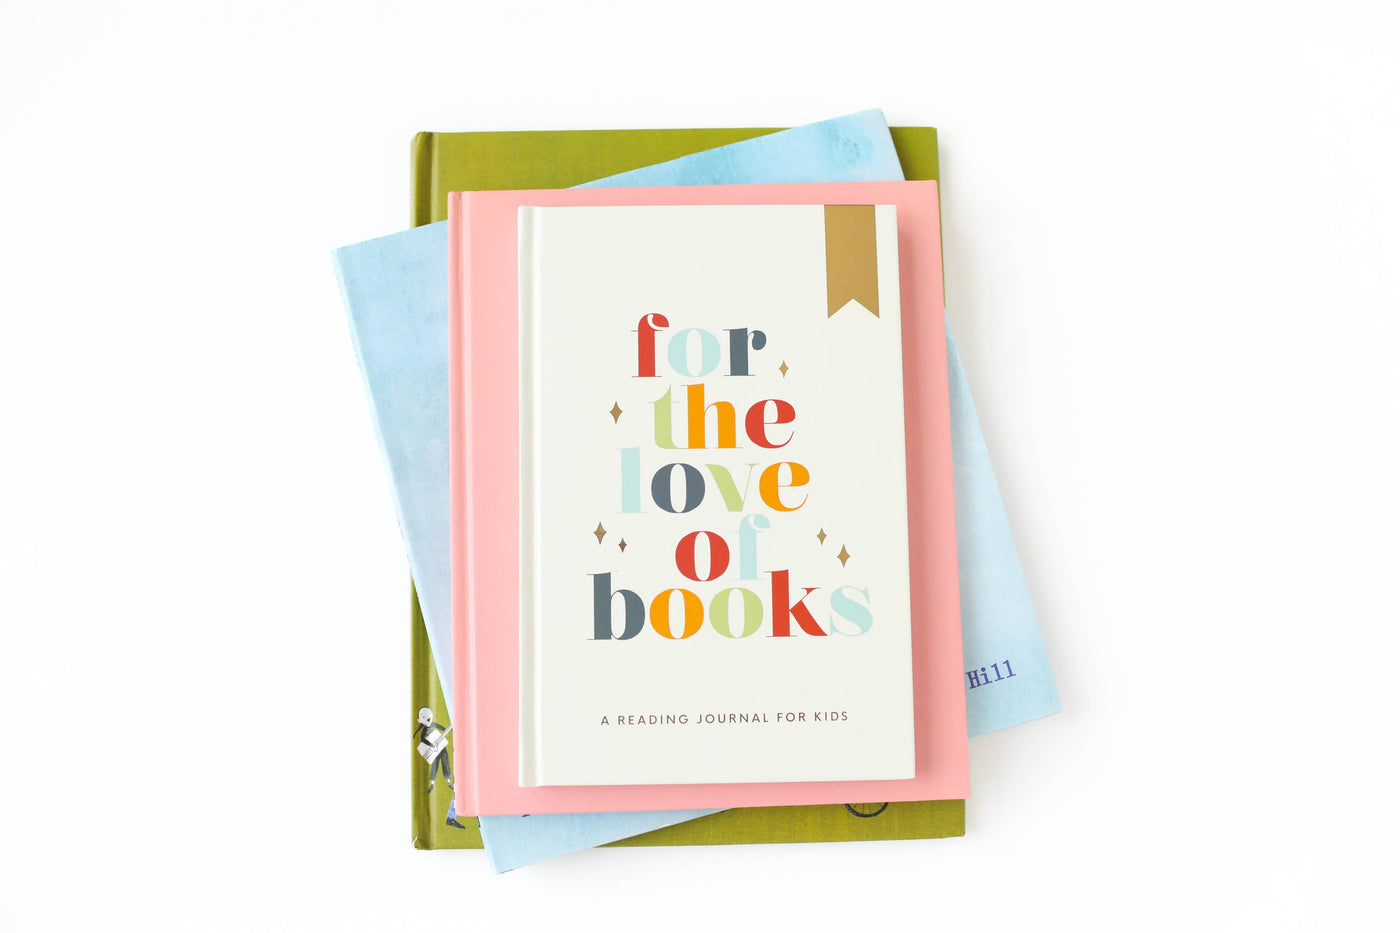 Reading Journal for Kids: For the Love of Books